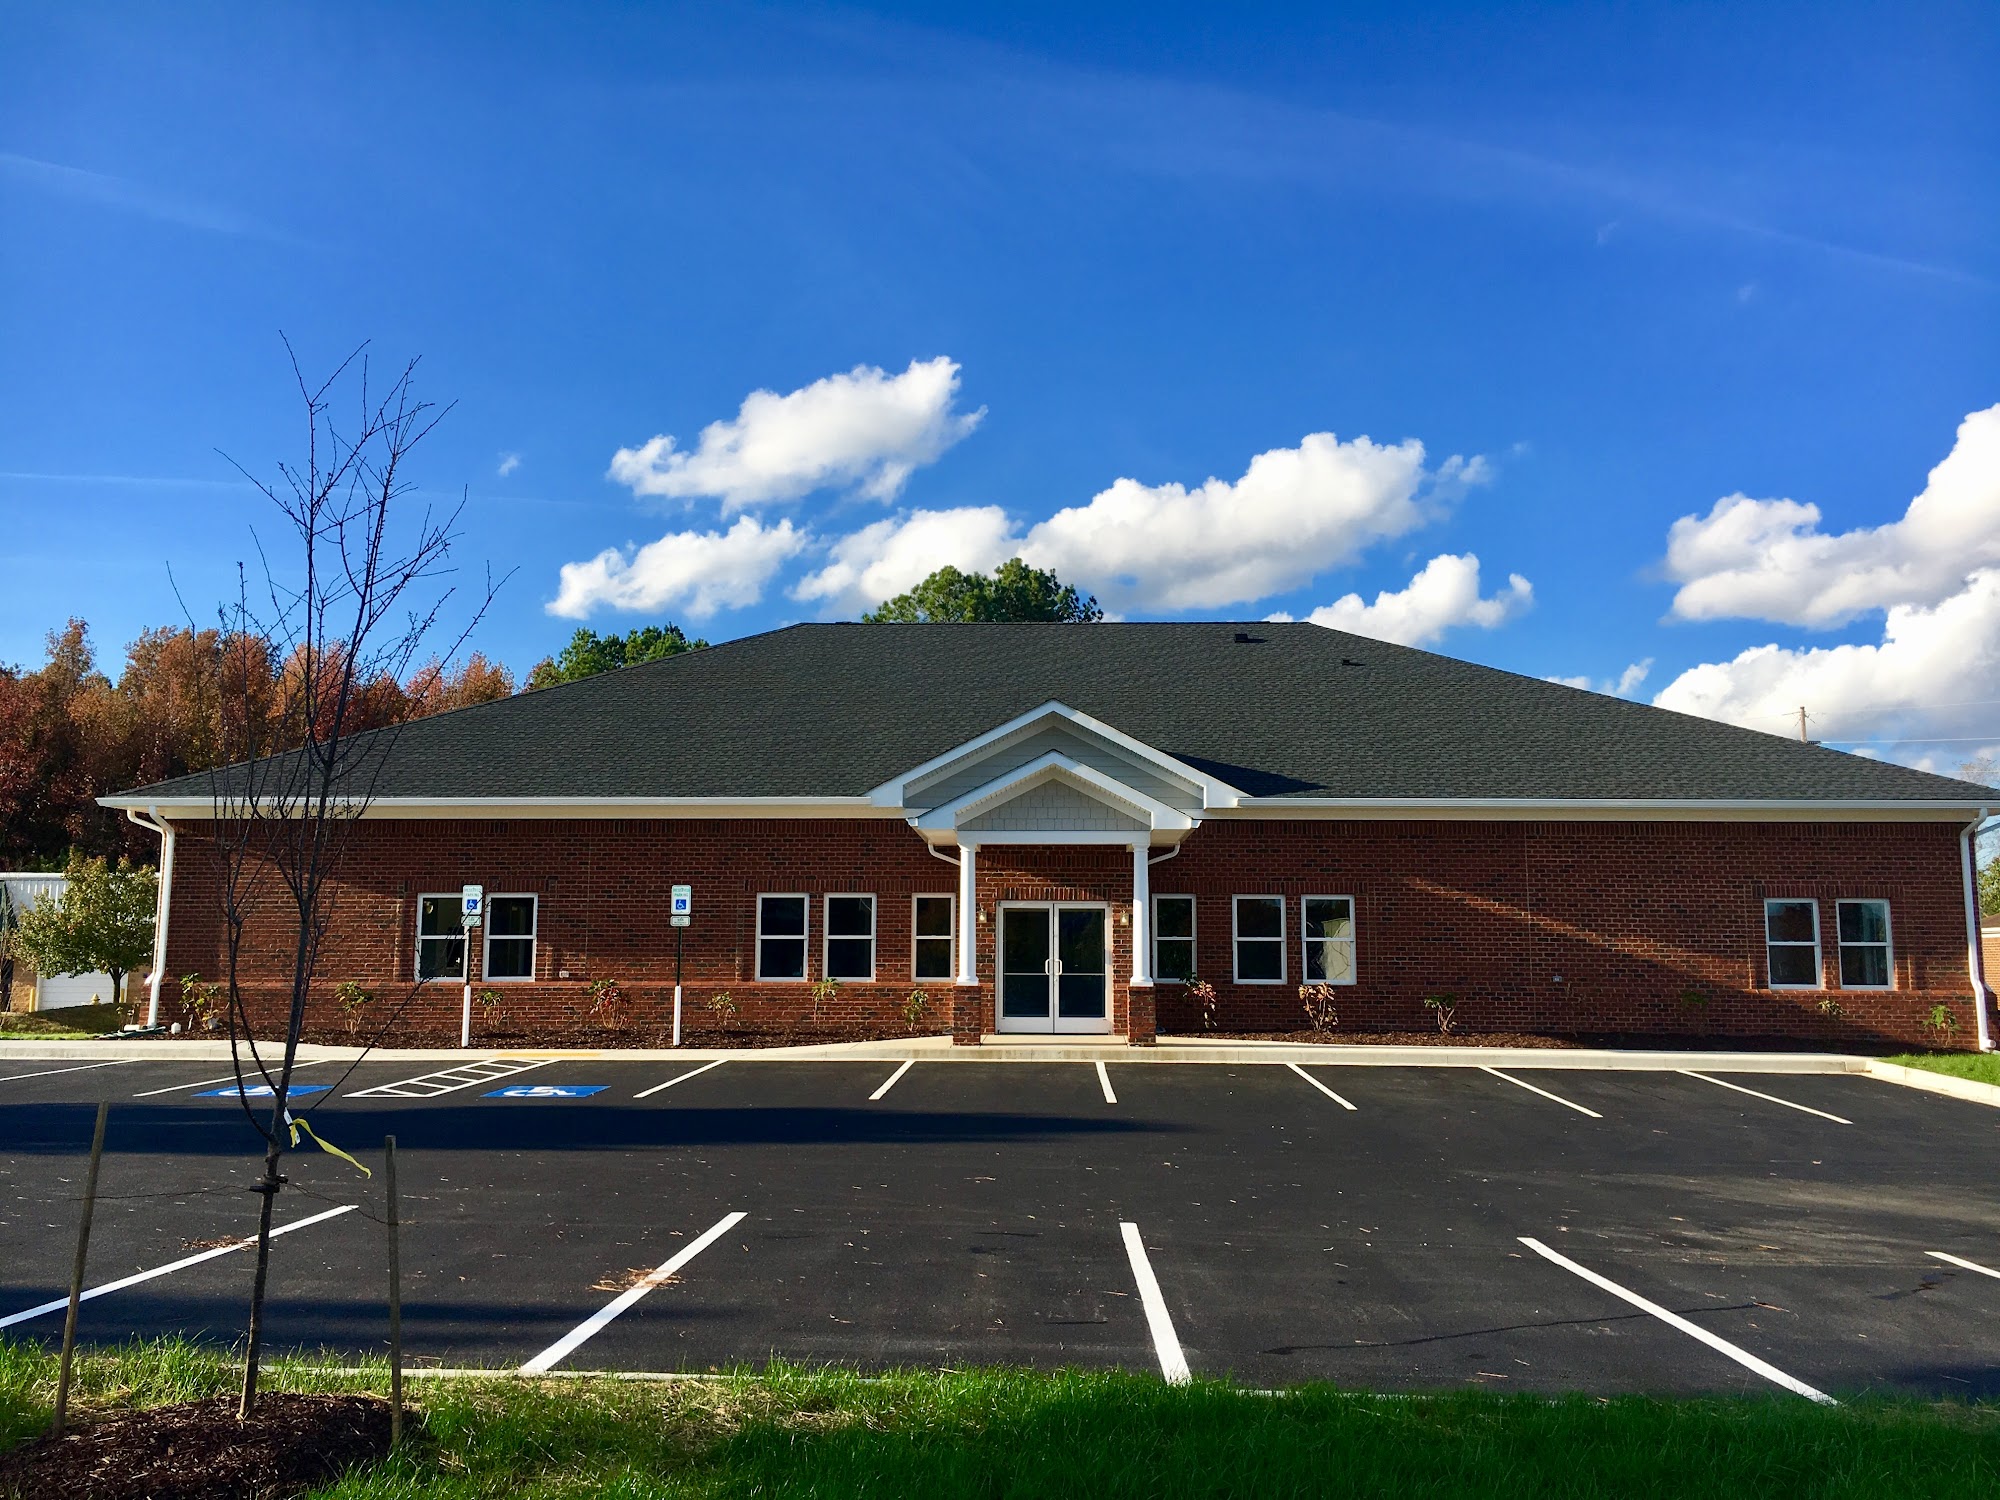 Patuxent Dental 44210 Airport View Dr, Hollywood Maryland 20636